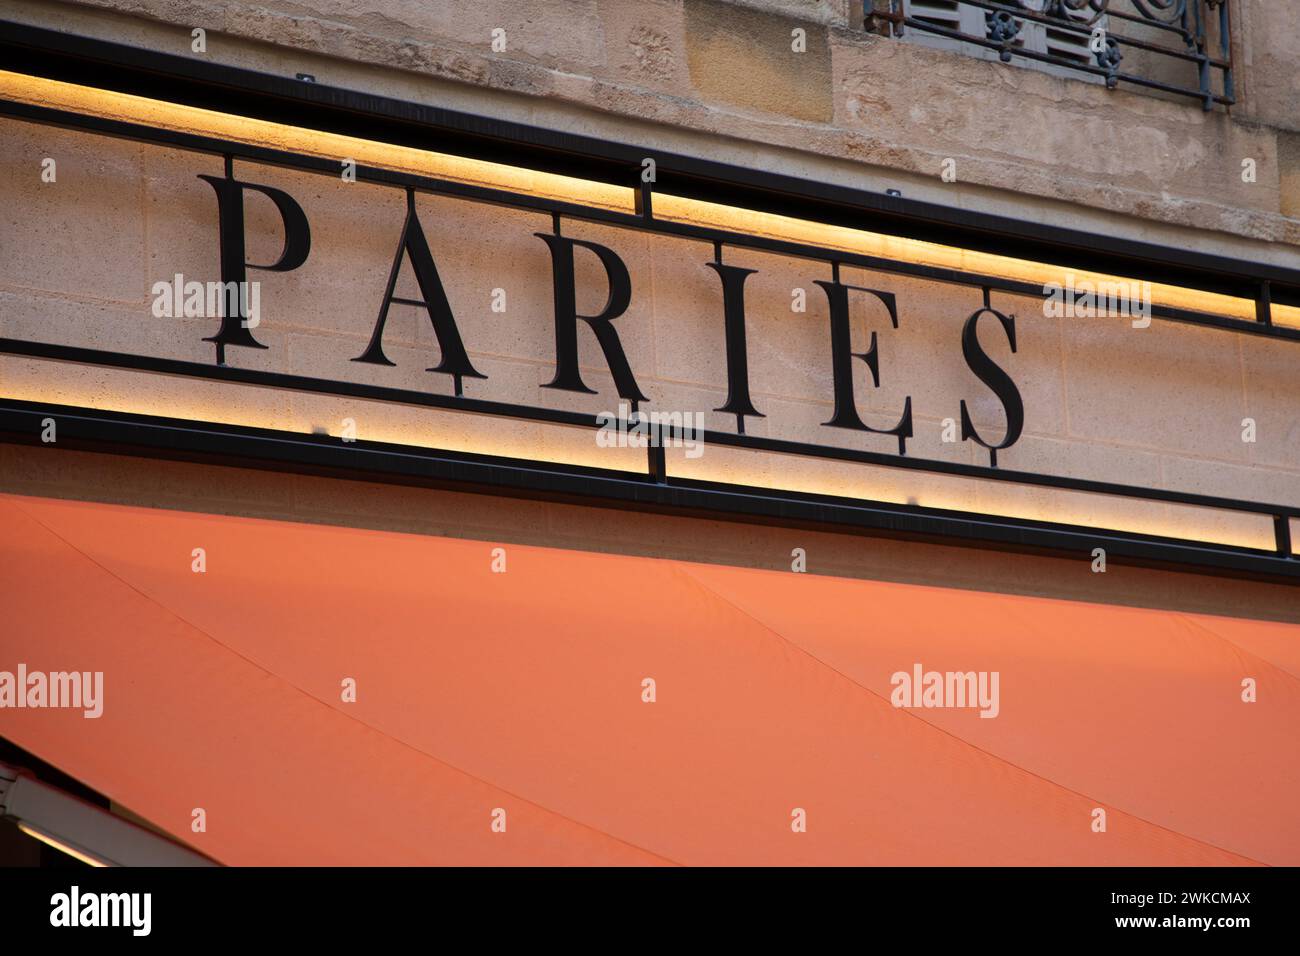 Bordeaux , France - 02 19 2024 : paries logo brand and sign text facade ...